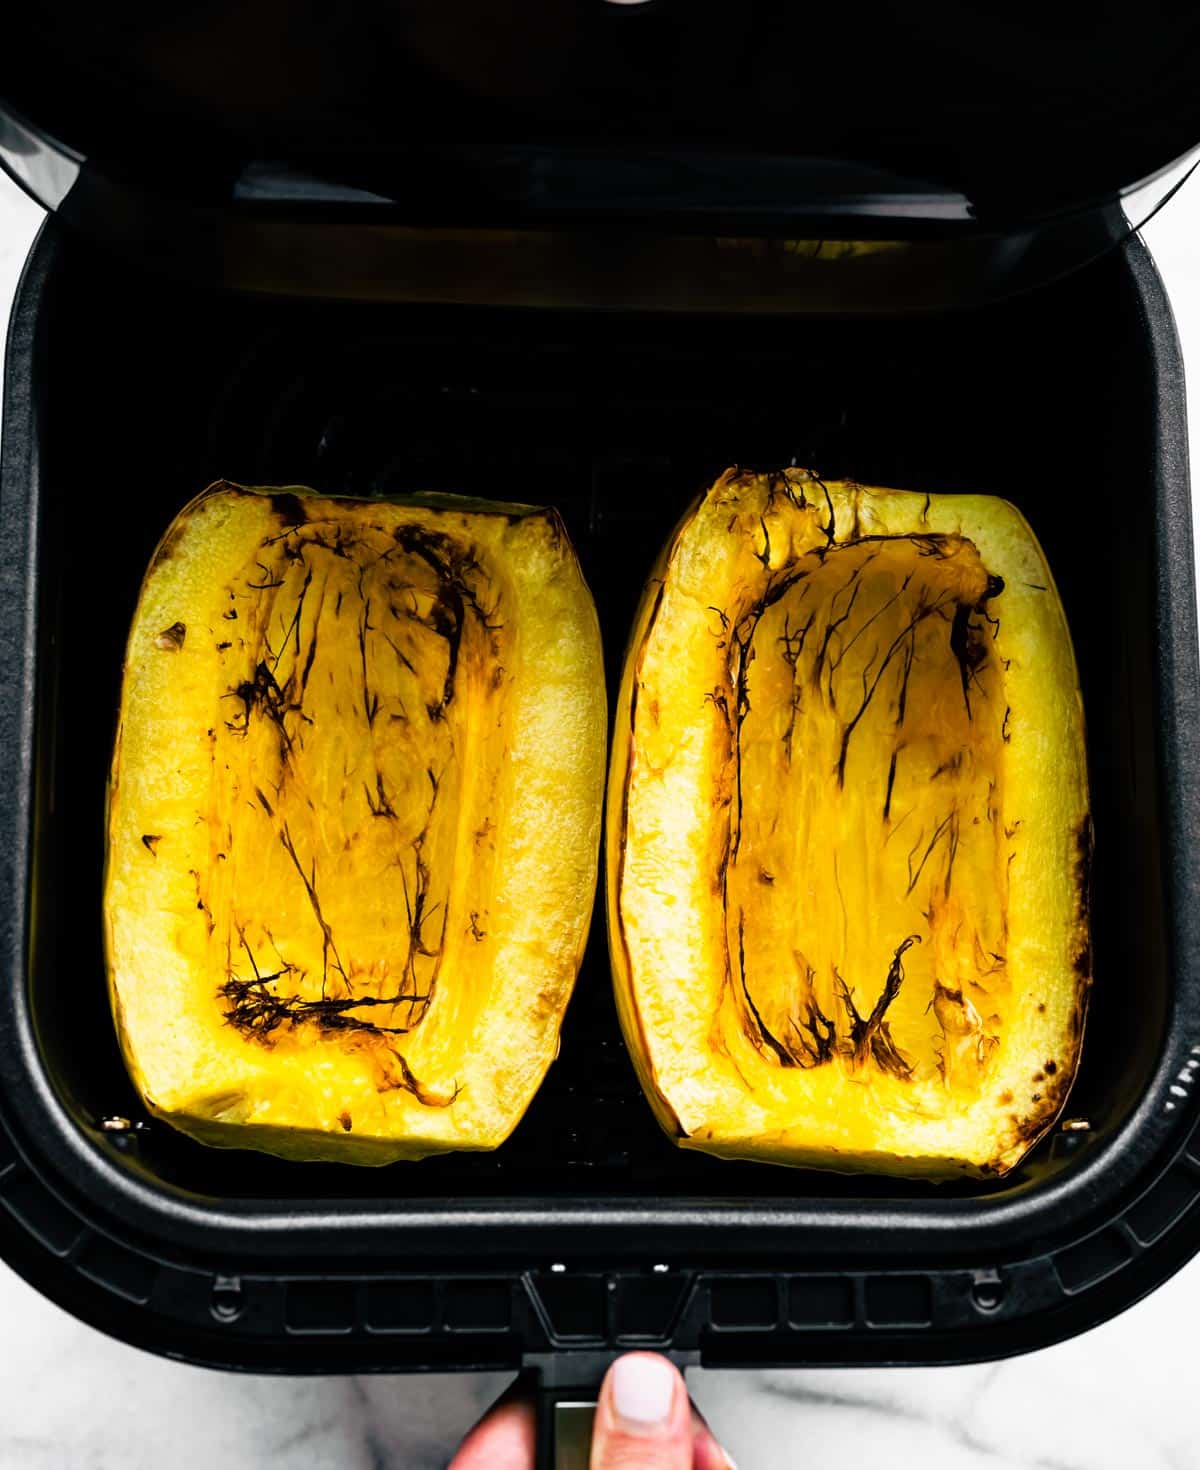 A woman's hand opening an air fryer basket with two halves of cooked spaghetti squash.